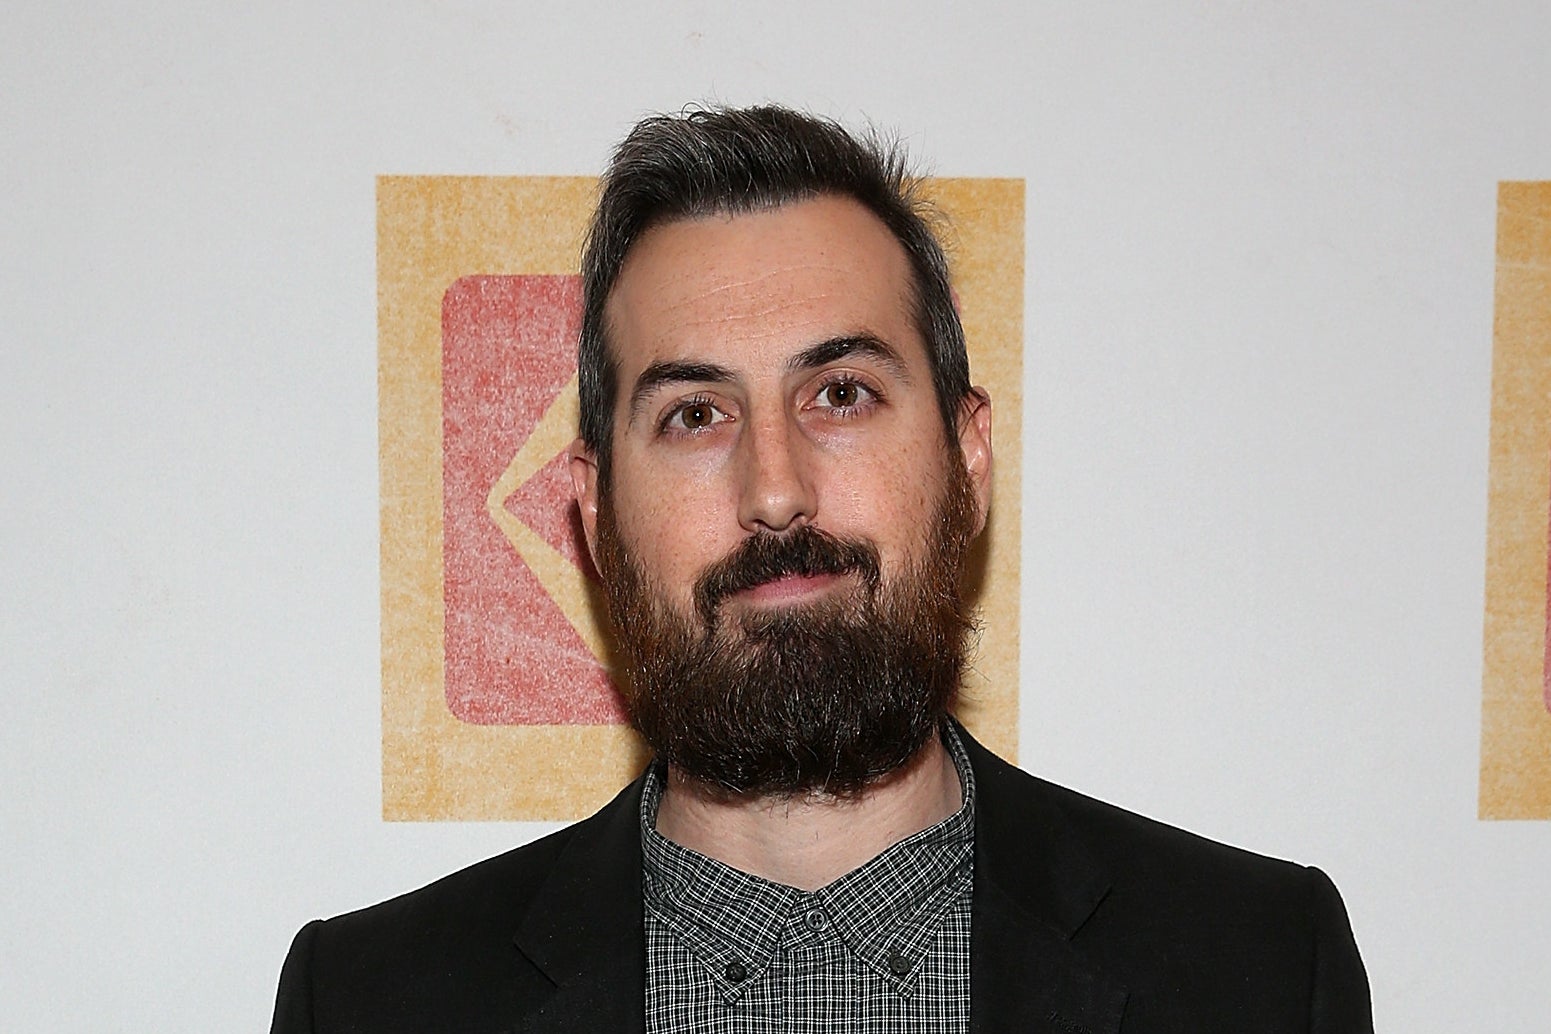 Ti West attends the Kodak Motion Picture Awards Season Celebration on March 1, 2018 in Los Angeles, California.